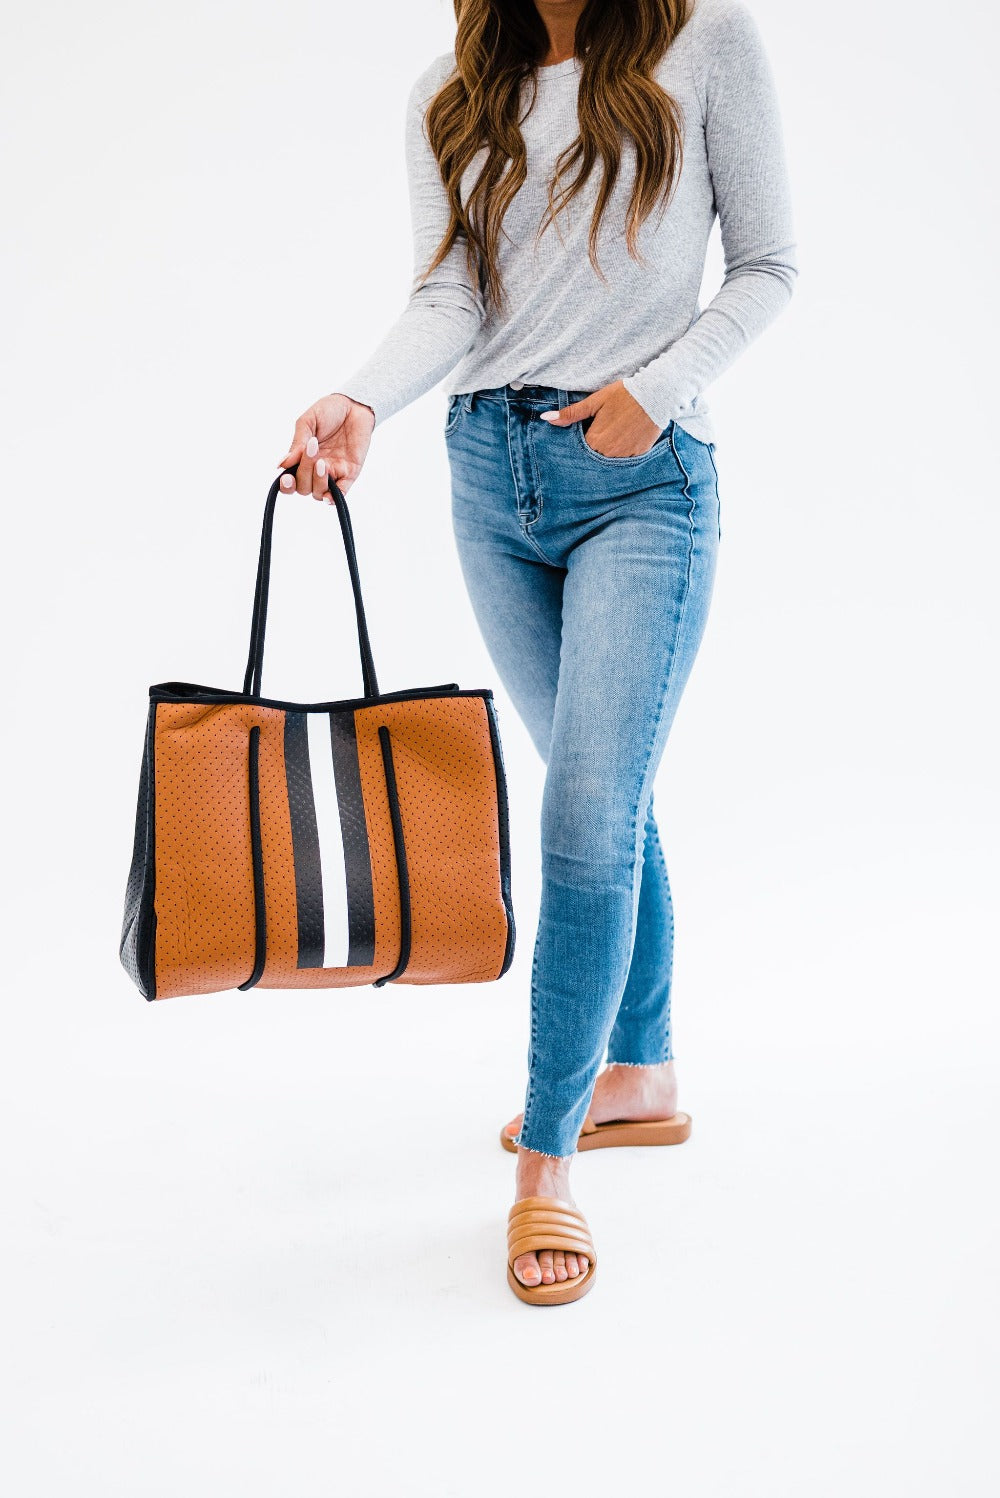 Clare V, Bags, Clare V Simple Tote Camel Suede With Stripes